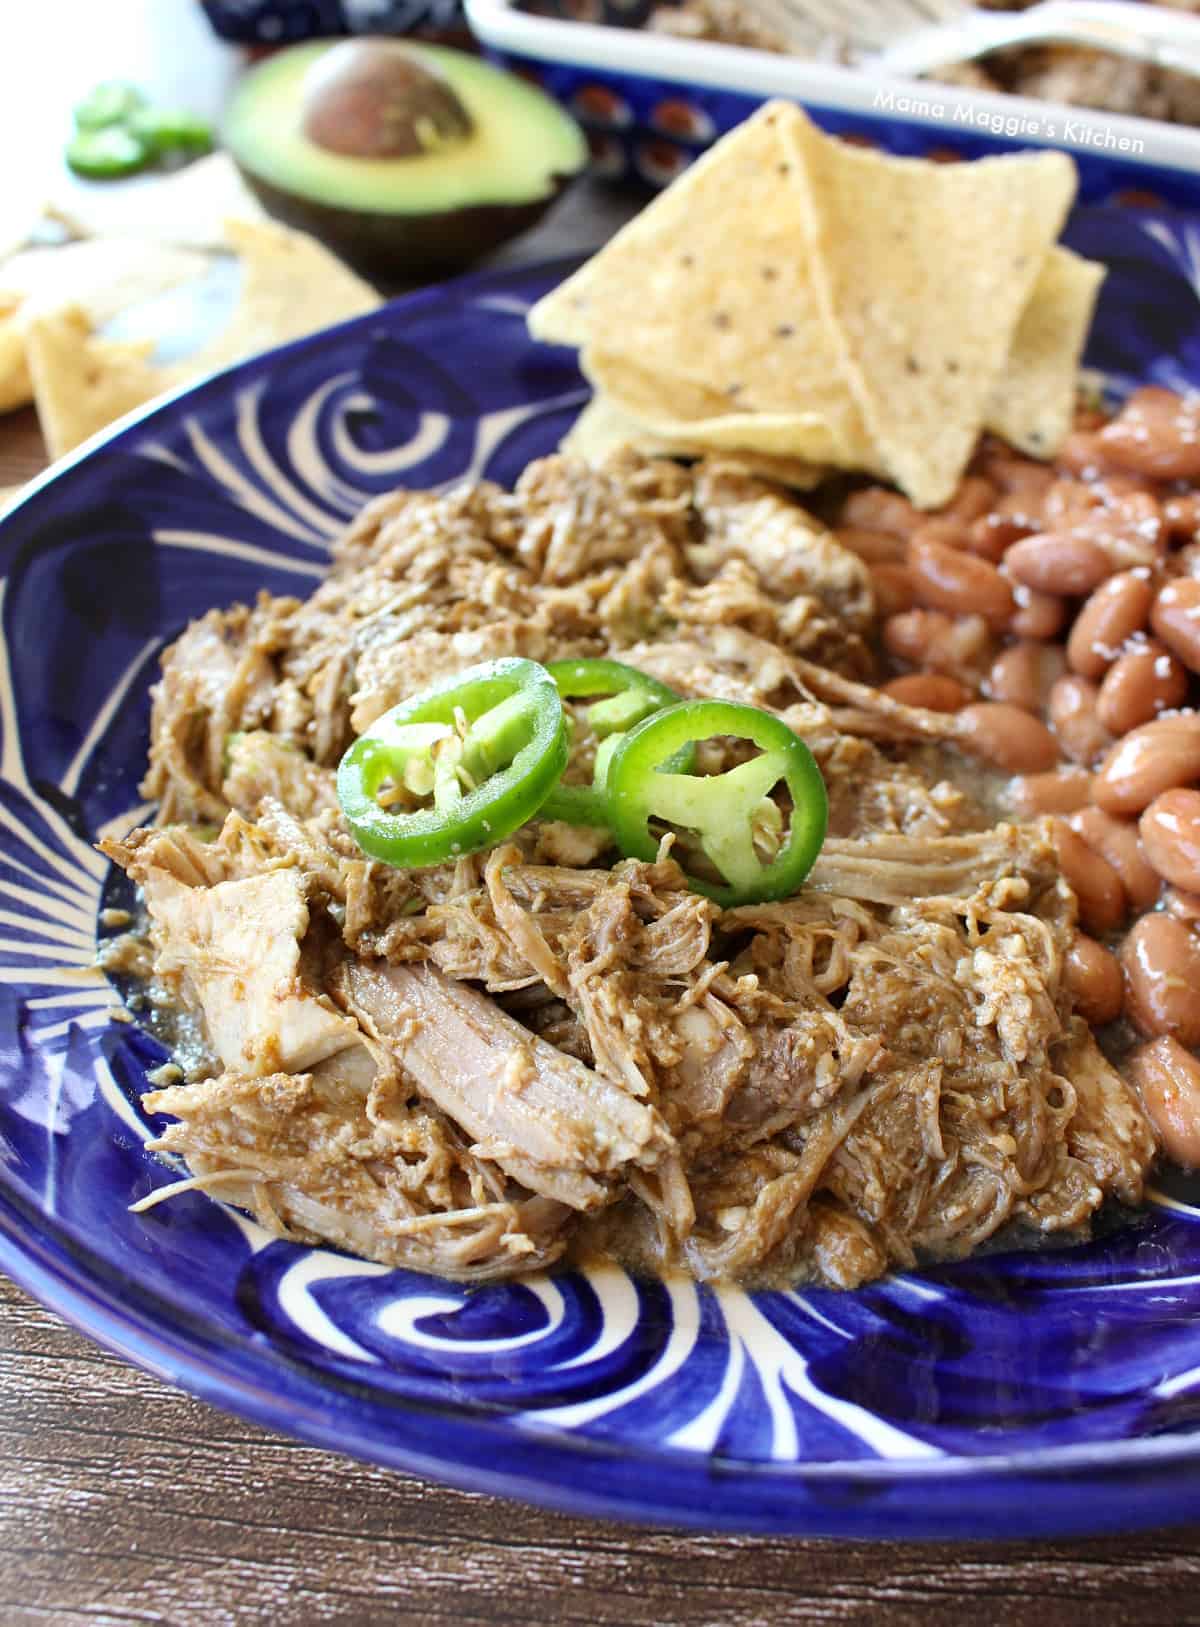 Slow Cooker Ancho Pork served on a blue plate and topped with jalapeno slices.